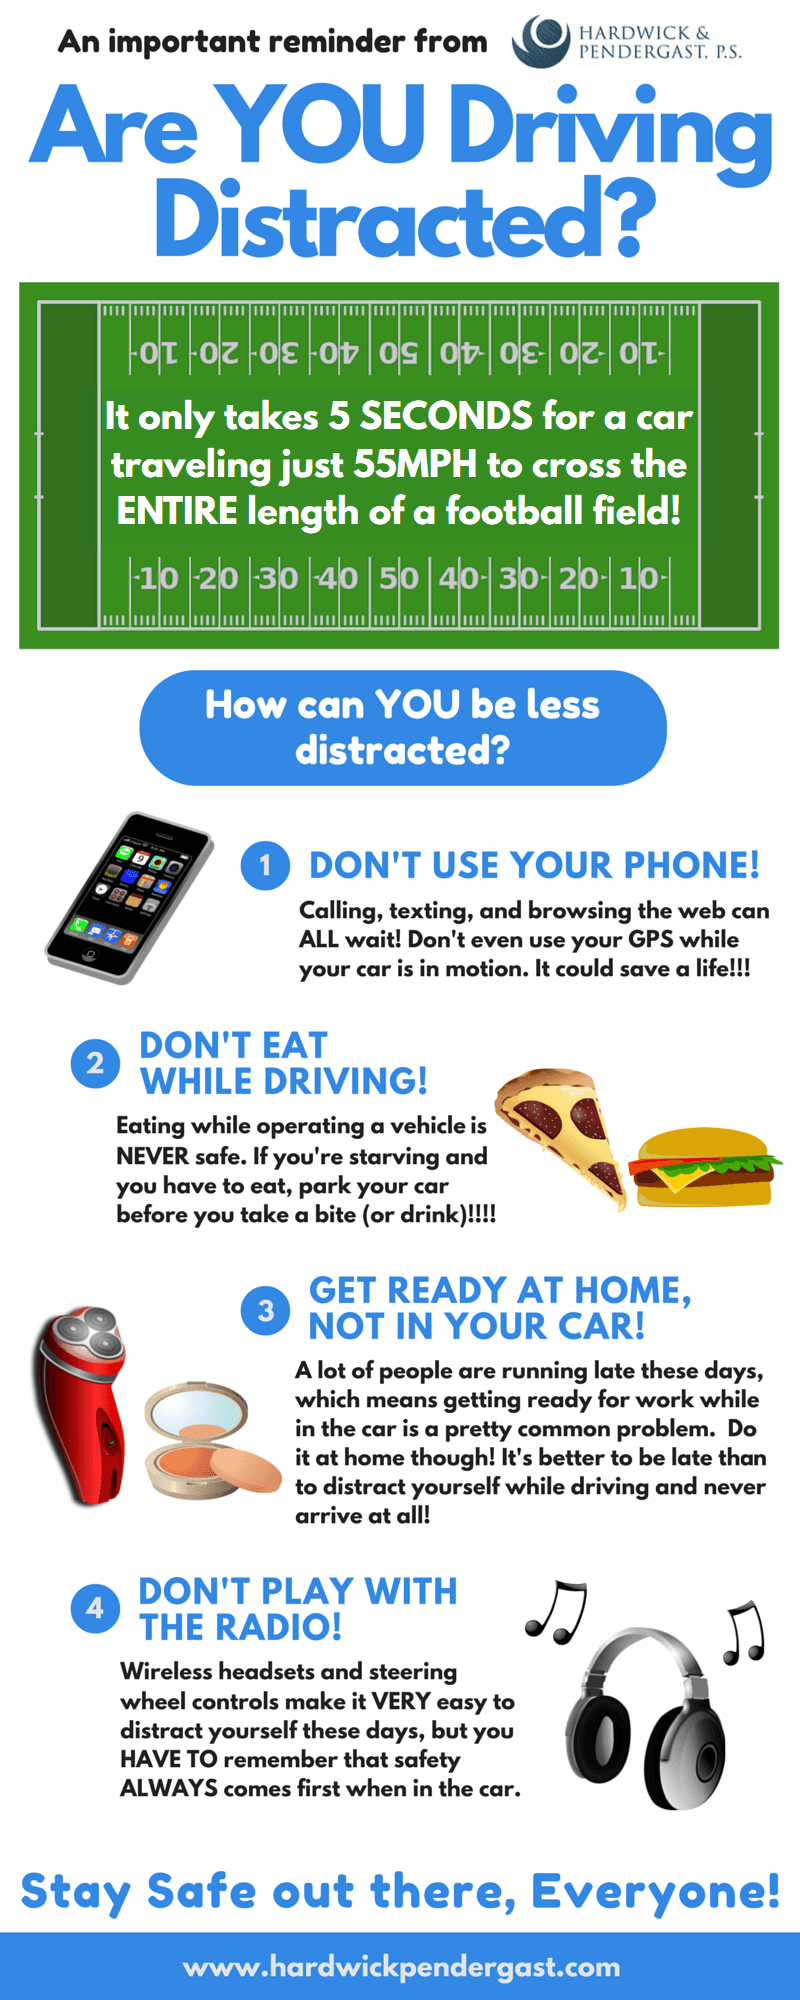 Infographic titled: Are YOU Distracted Driving?